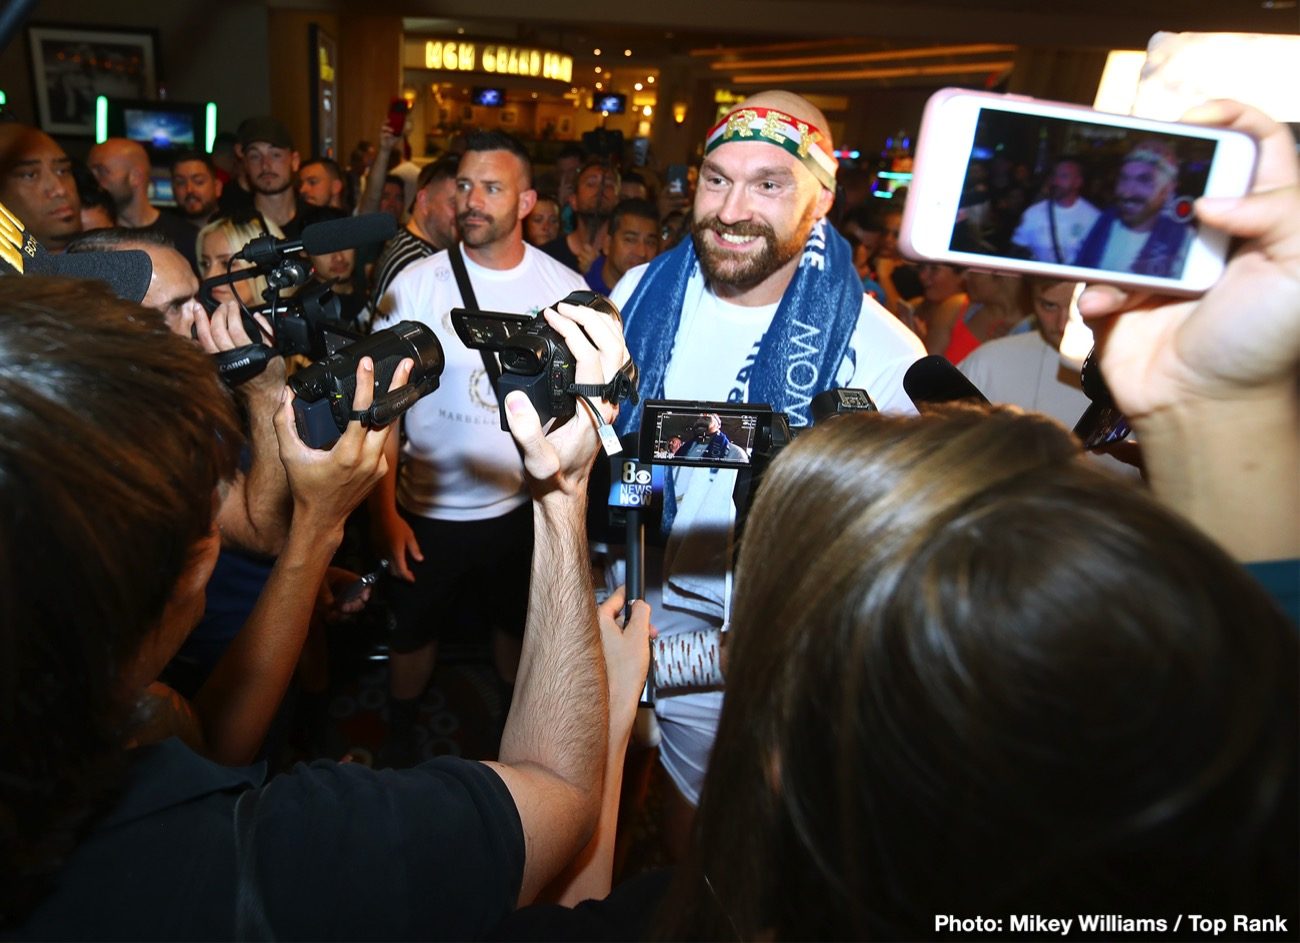 Image: Andy Ruiz tells Tyson Fury: "Stay in your lane"